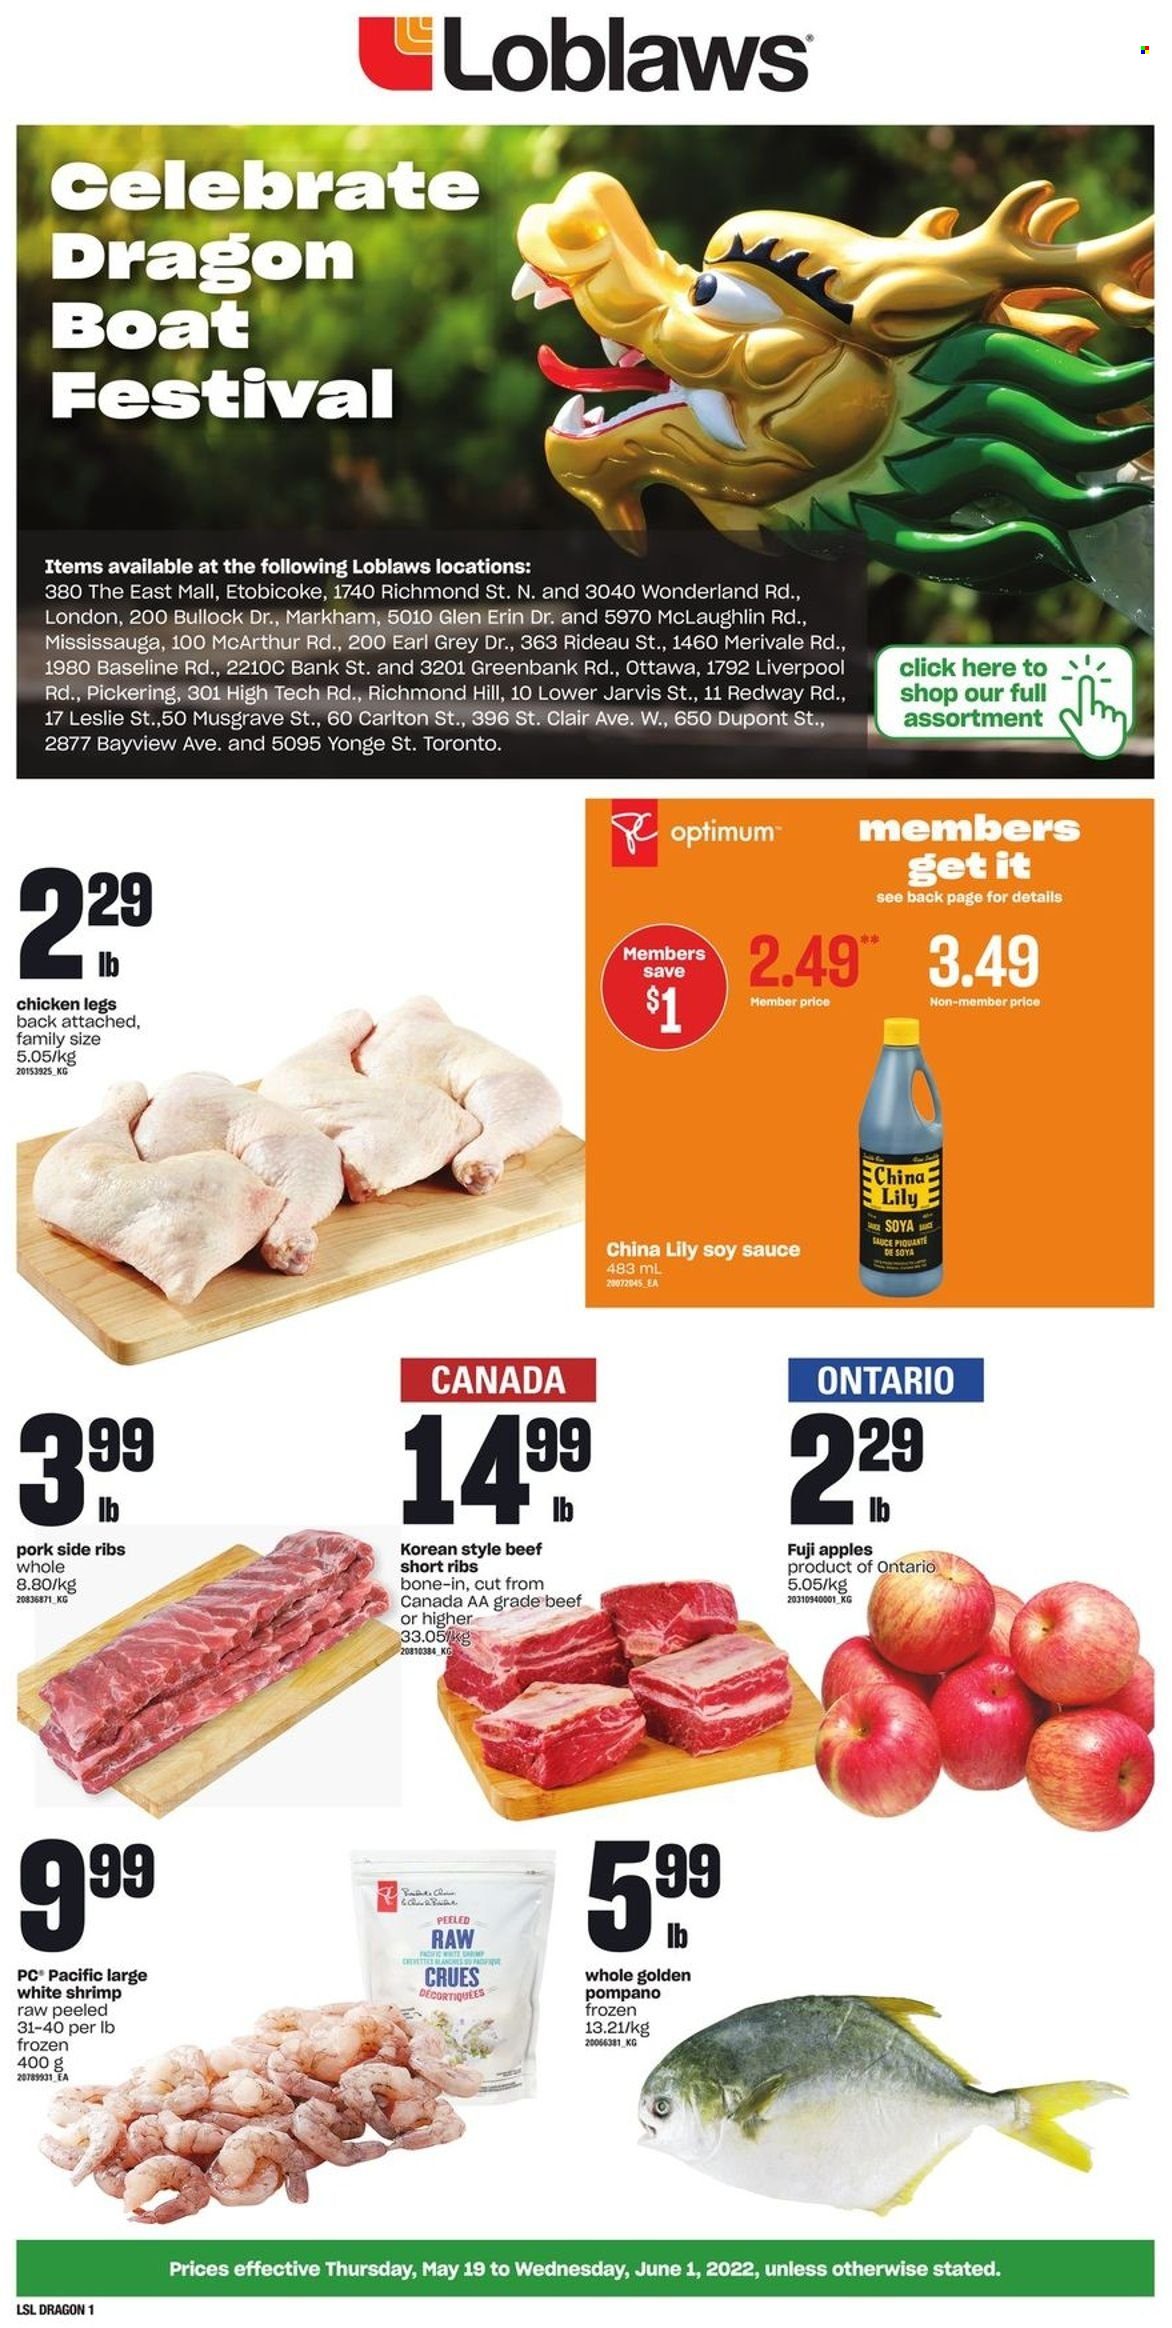 thumbnail - Loblaws Flyer - May 19, 2022 - June 01, 2022 - Sales products - pompano, shrimps, sauce, soy sauce, chicken legs, chicken, beef ribs, Optimum. Page 1.